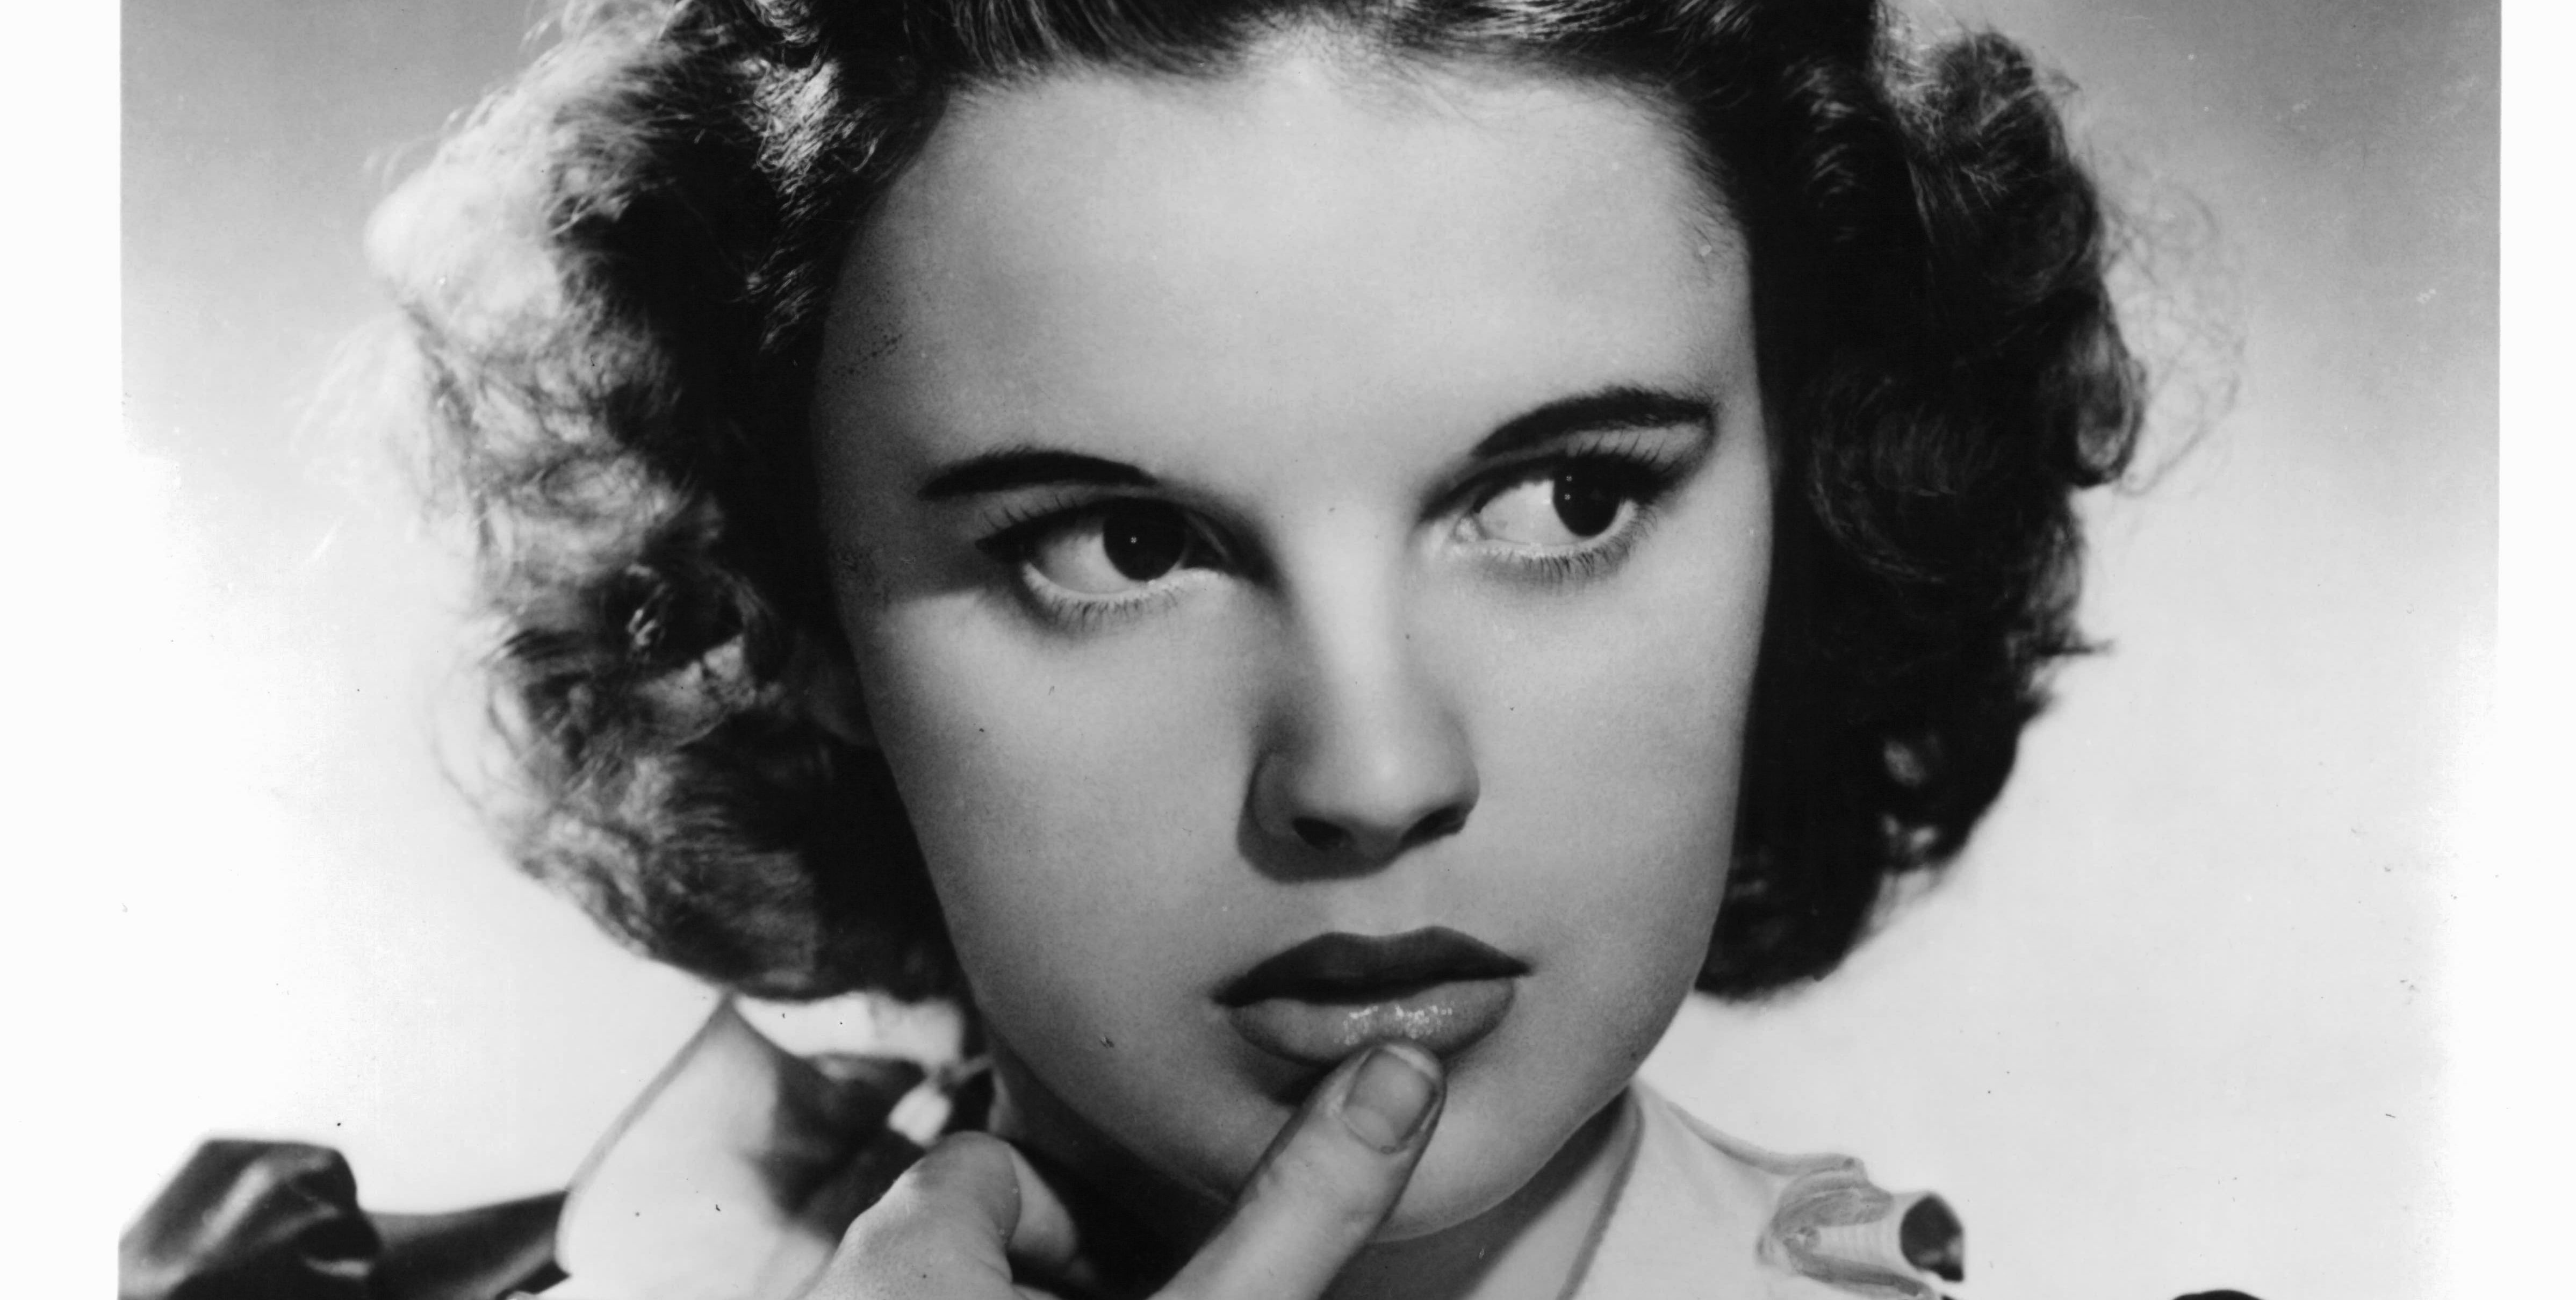 andreas kreis recommends Nude Pictures Of Judy Garland